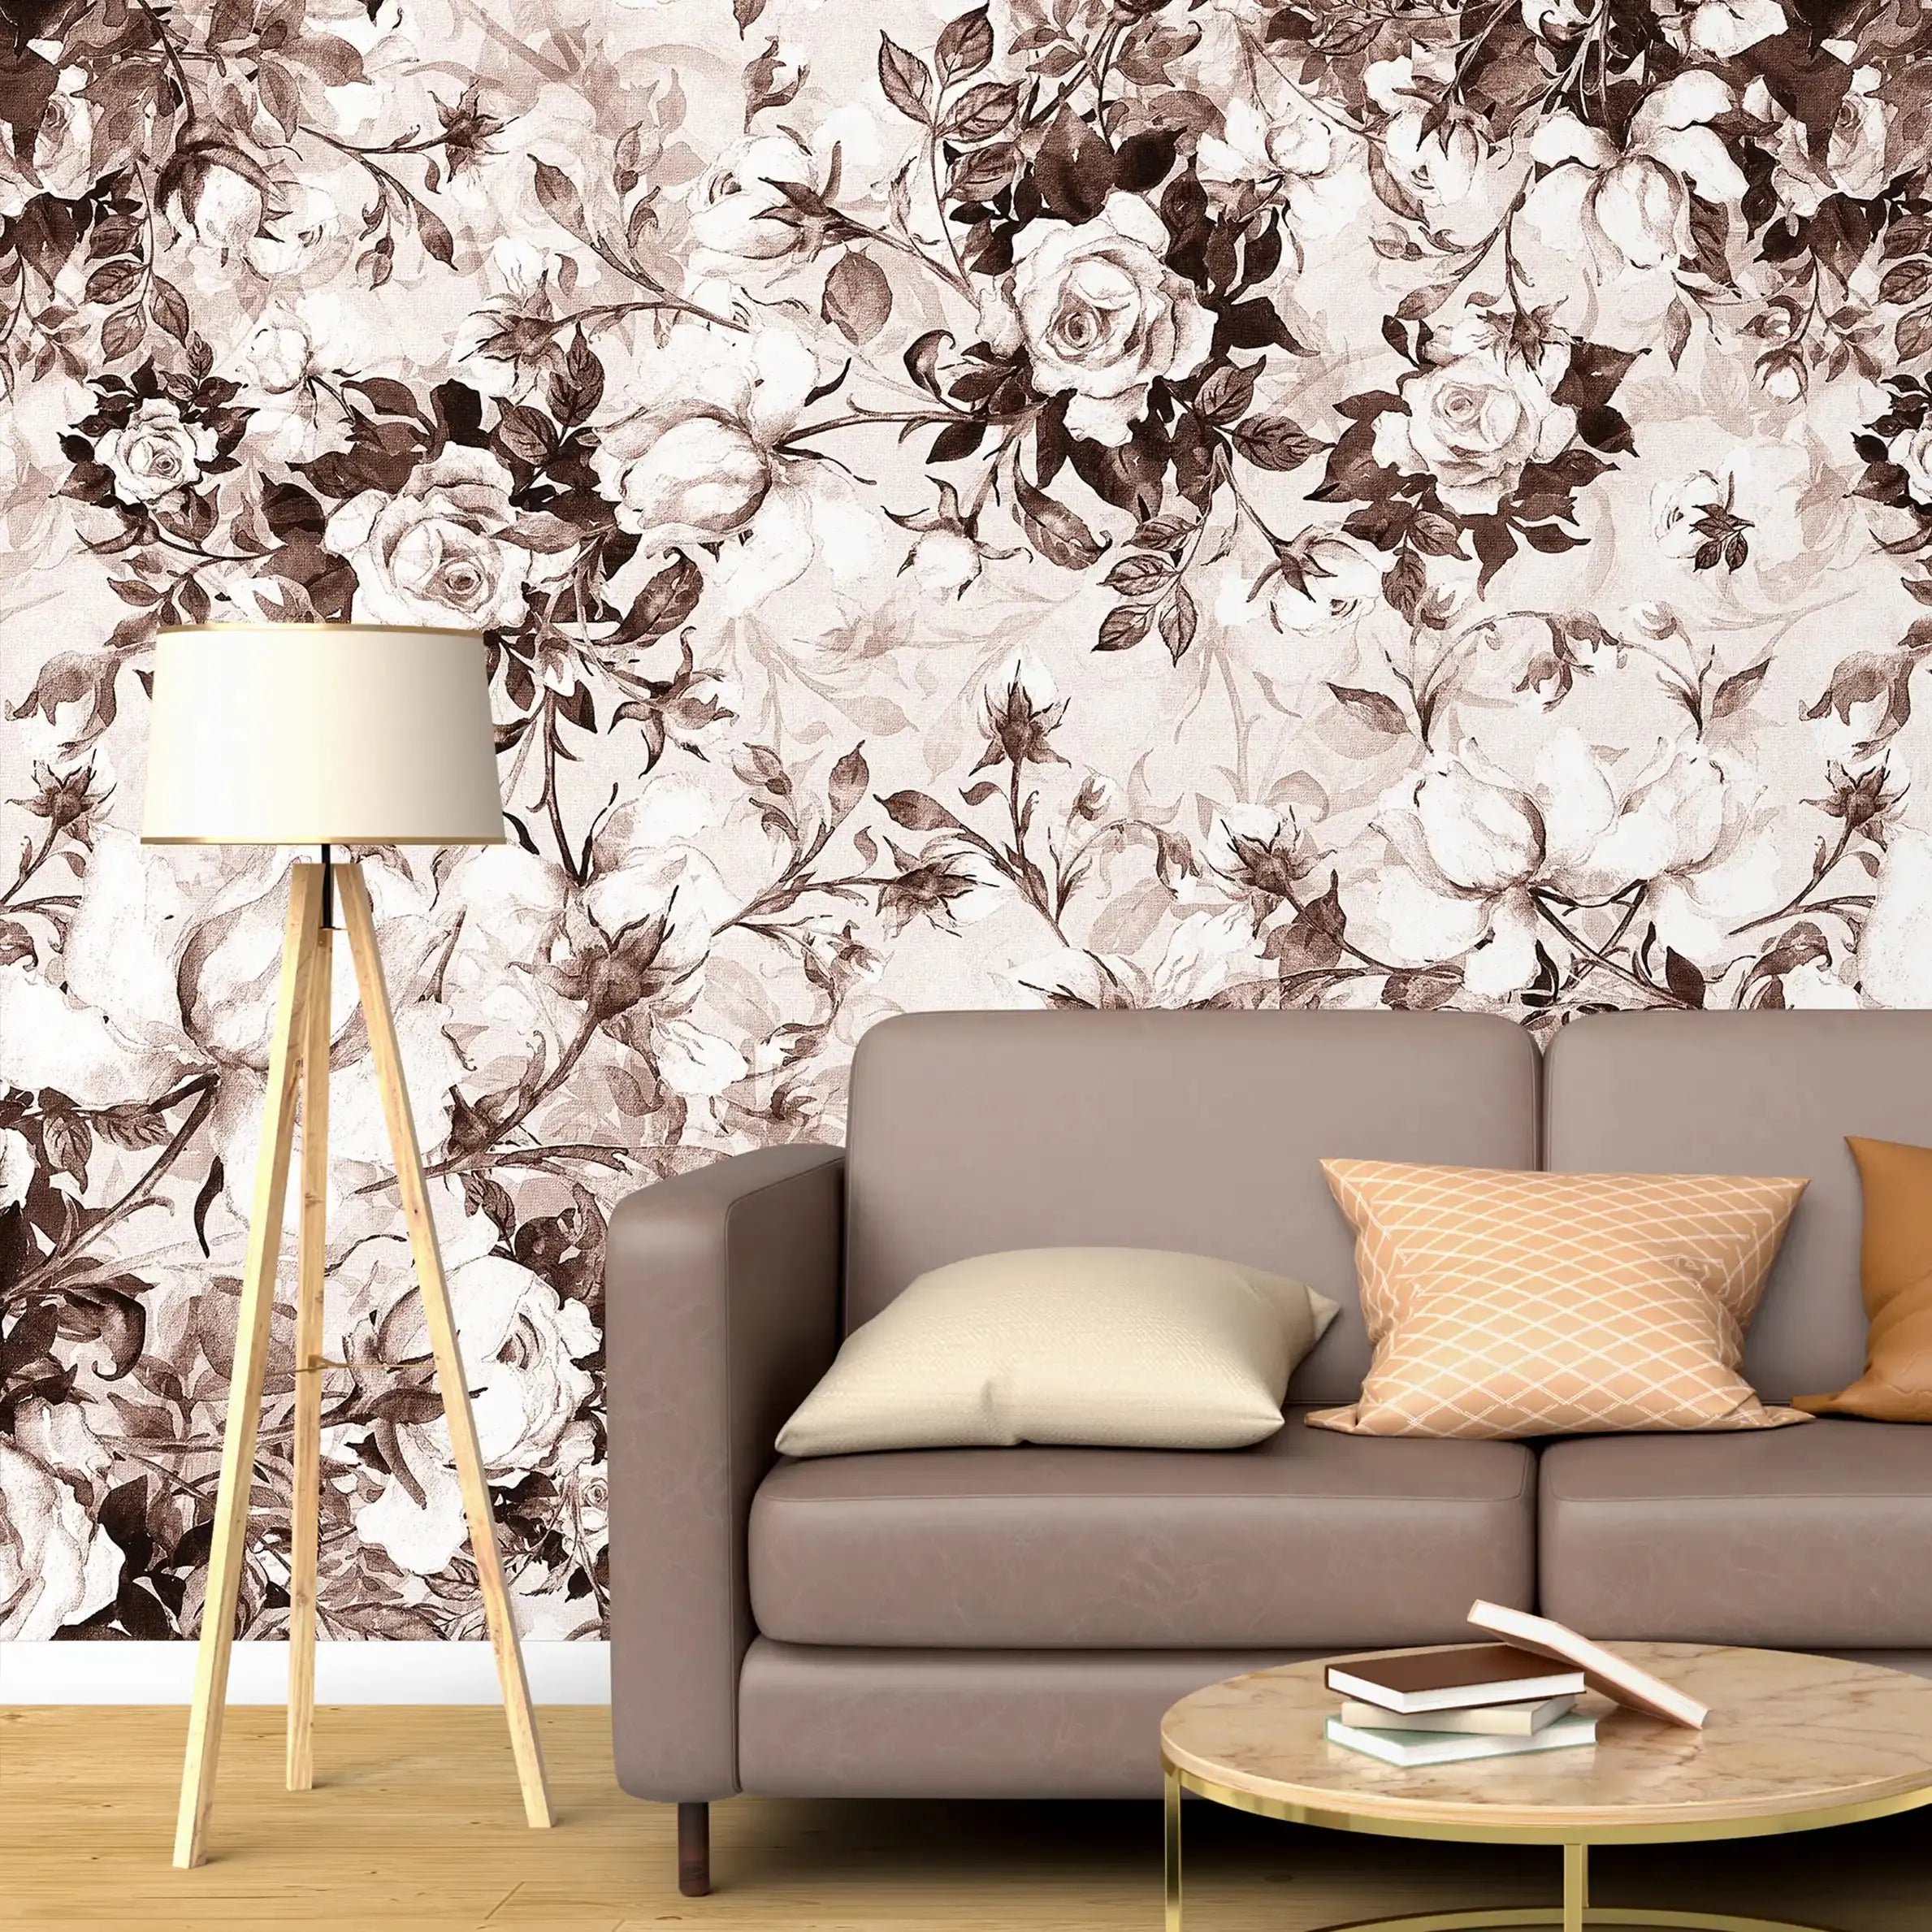 3043-D / Pink Floral Self-Adhesive Wallpaper: Easy Peel and Stick Wall Mural, Modern Room Decor, Bathroom, and Kitchen - Artevella